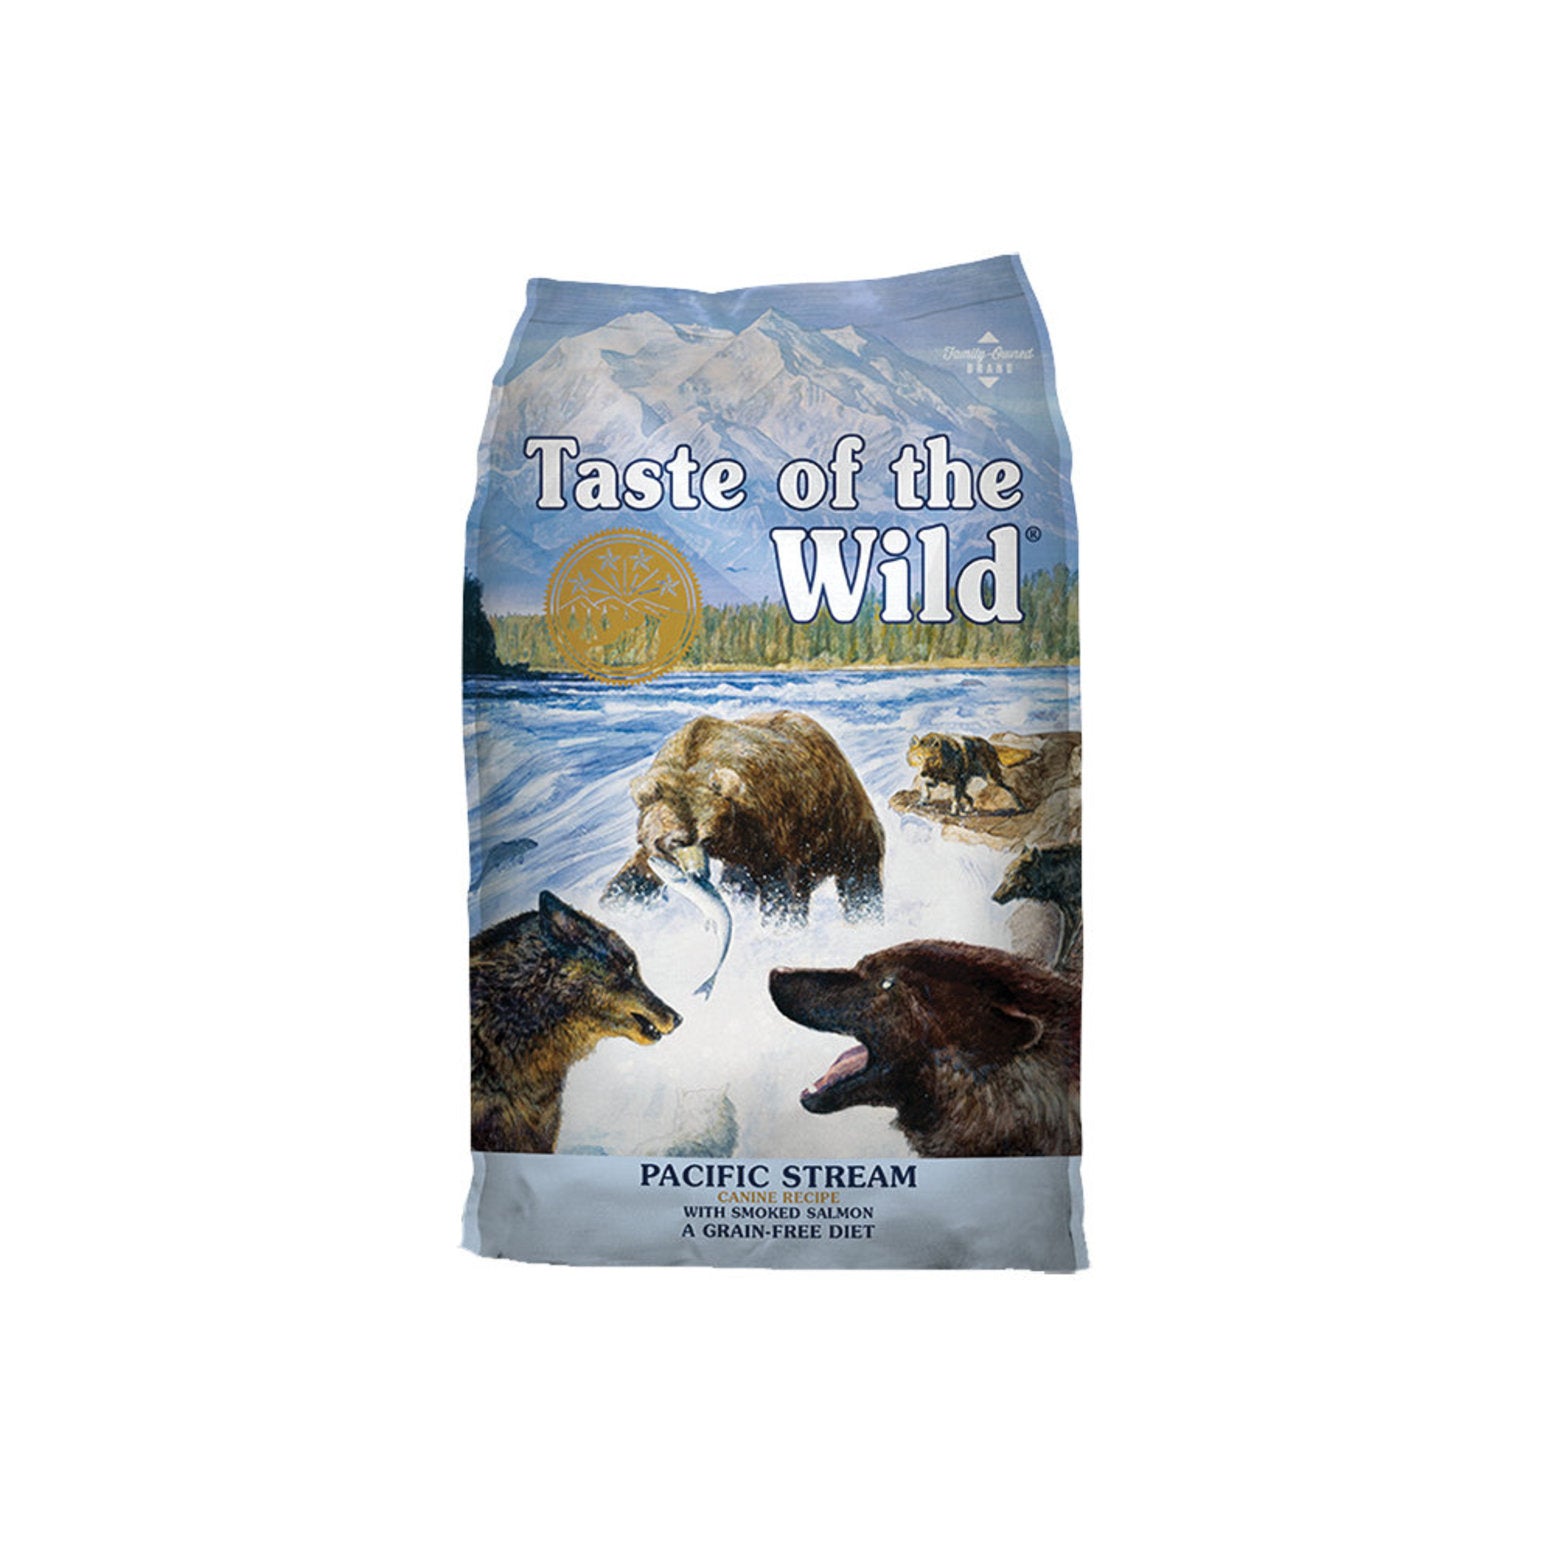 Taste of the Wild - Pacific Stream with Smoked Salmon (Dry Grain-Free Dog Food) - ARMOR THE POOCH